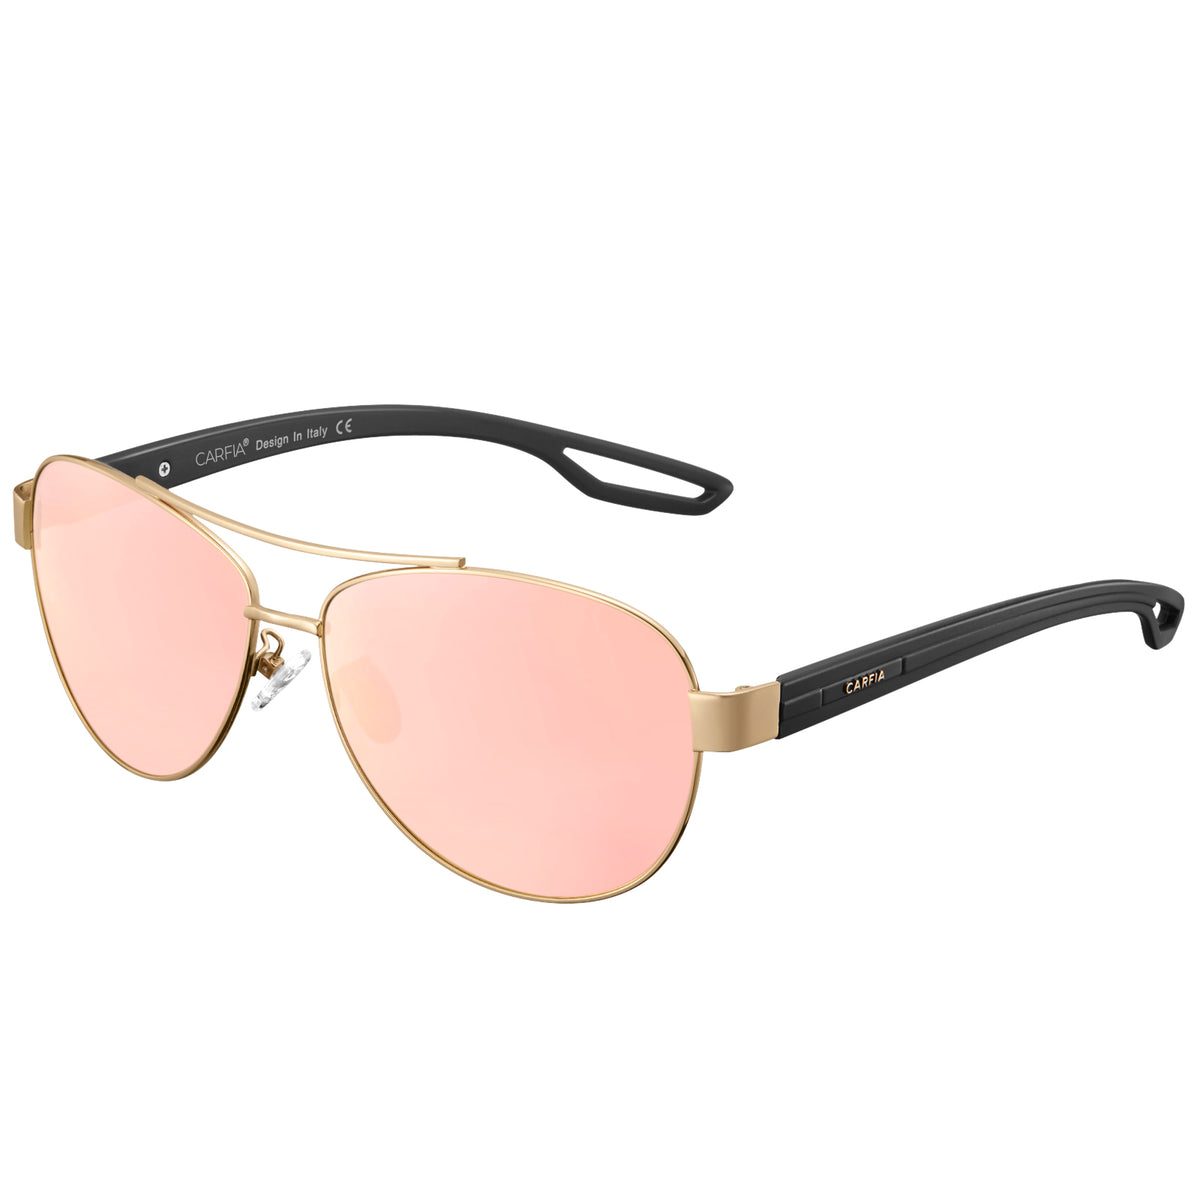 Tiamo - Bright Gold Frame with Pink Lenses